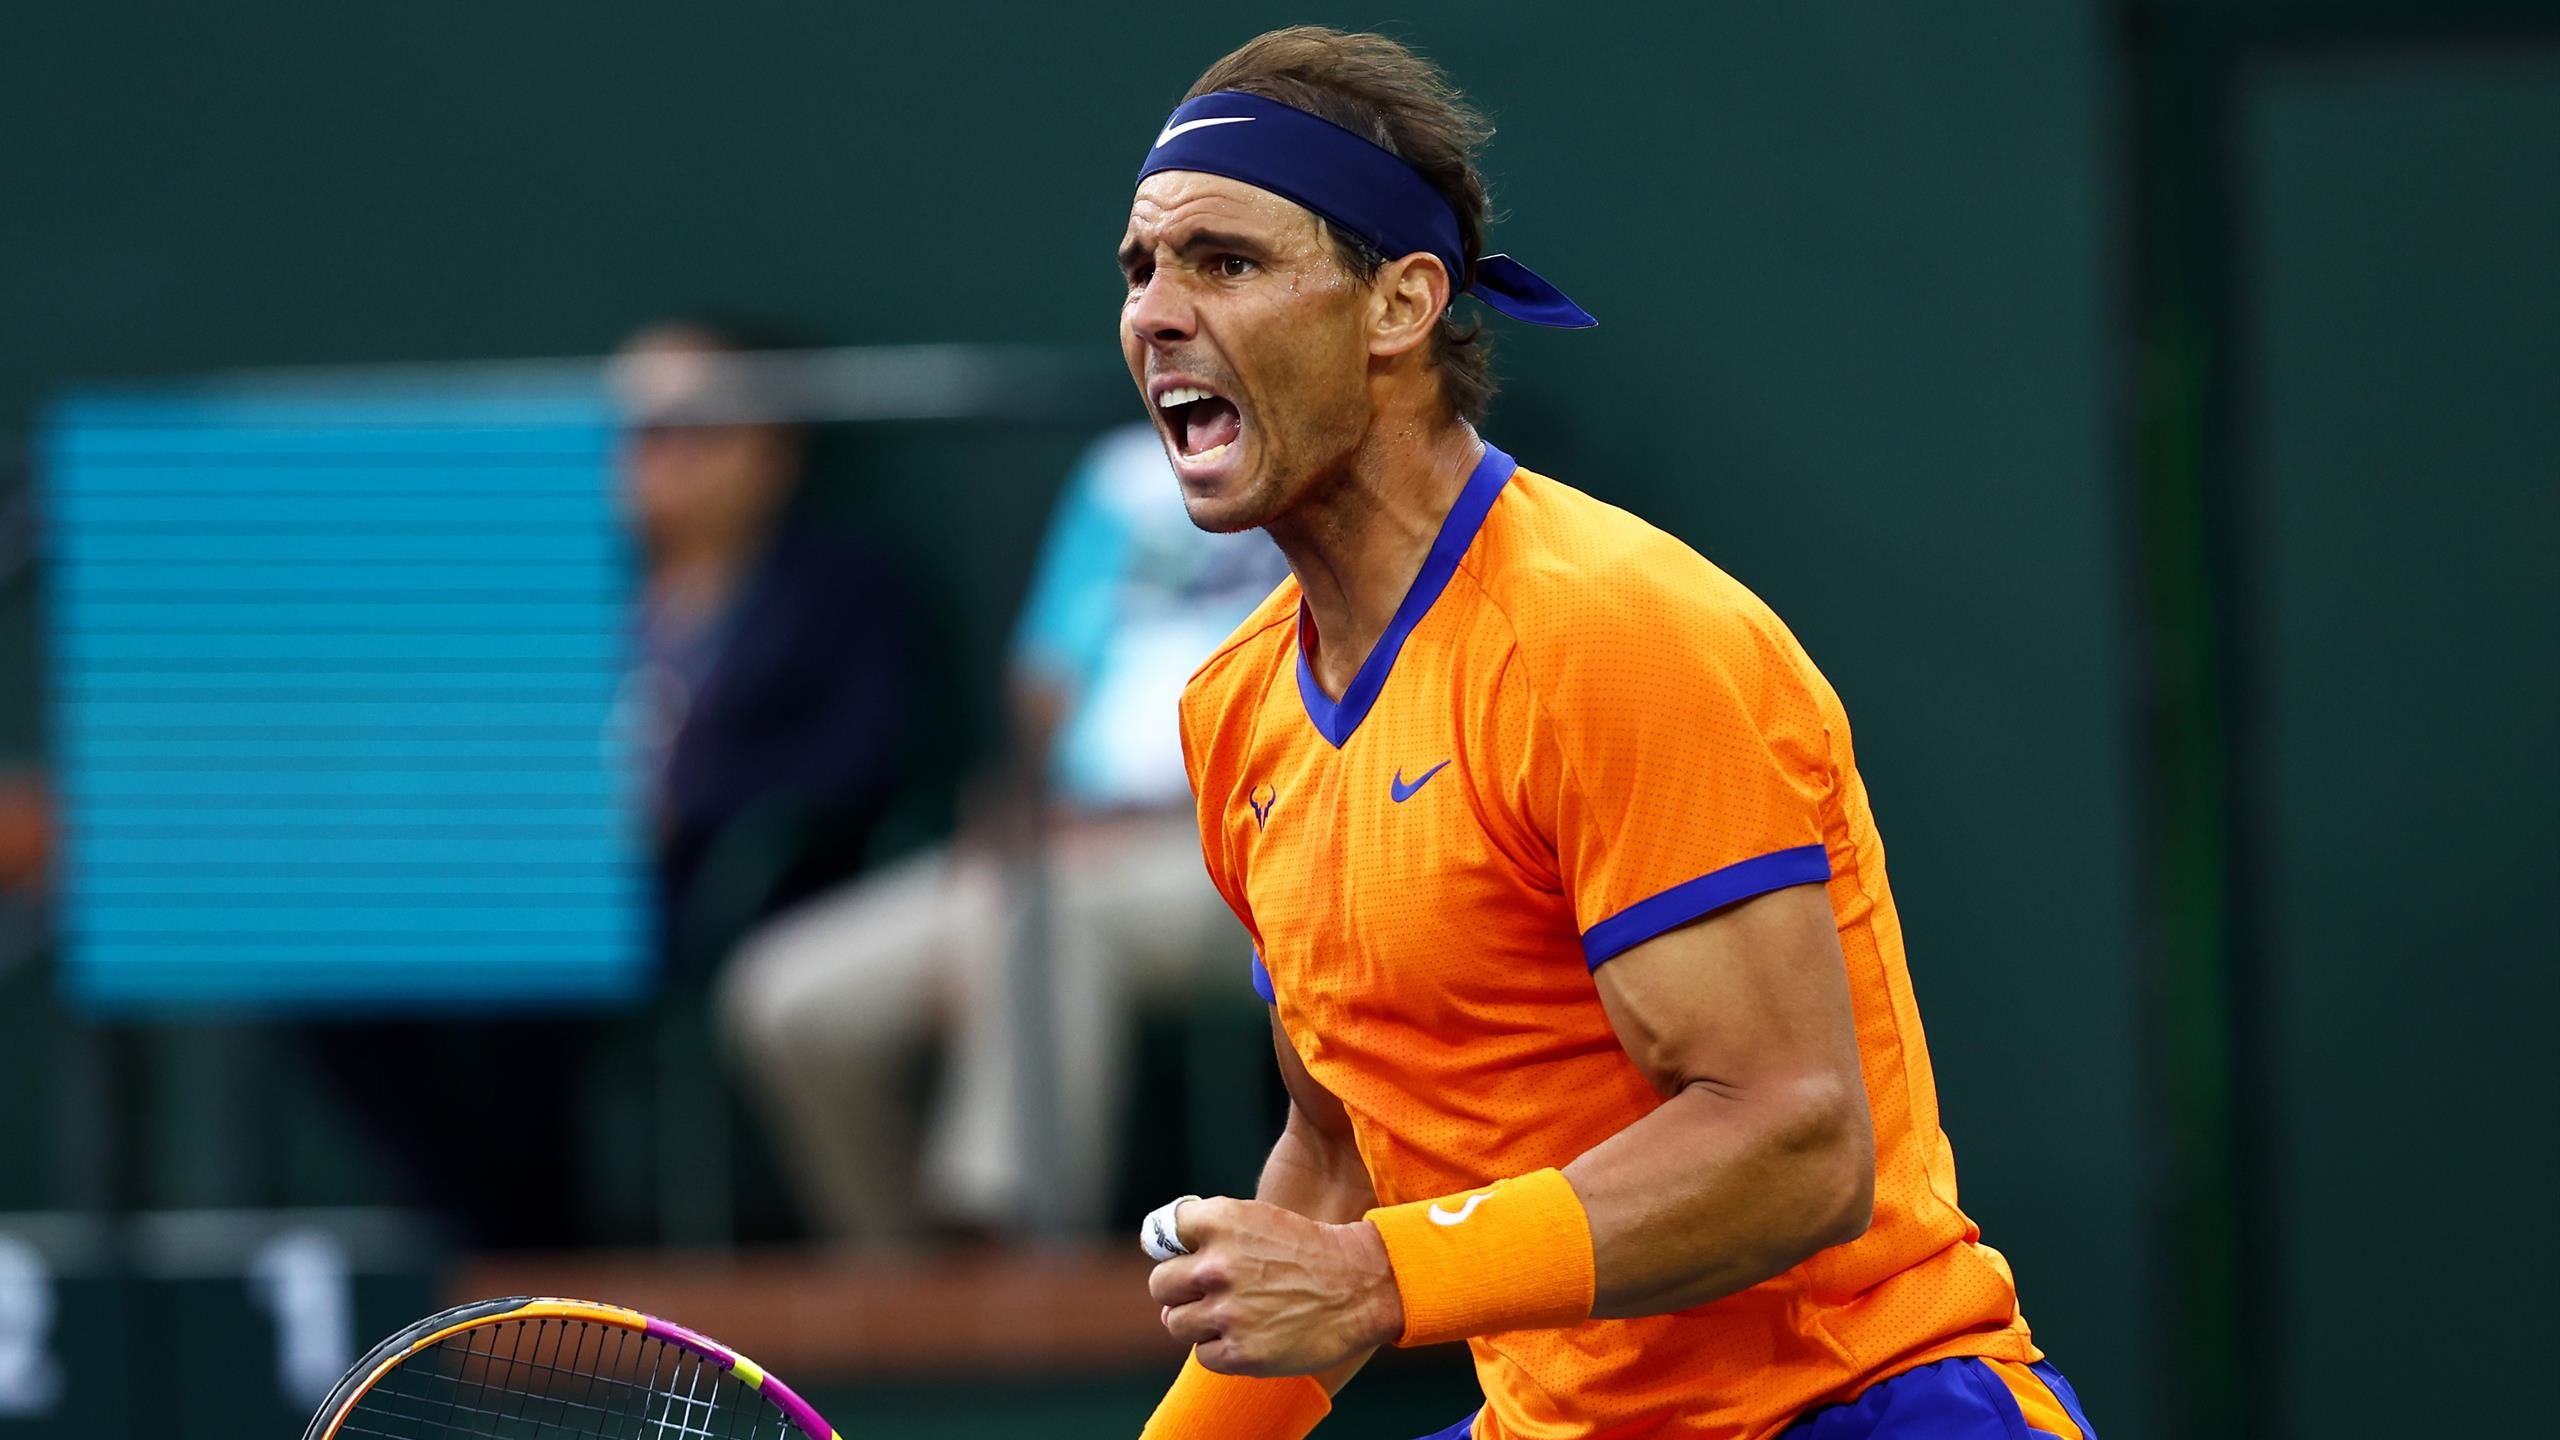 I will need to be ready - Rafael Nadal expecting a tough test from Taylor Fritz in Indian Wells final